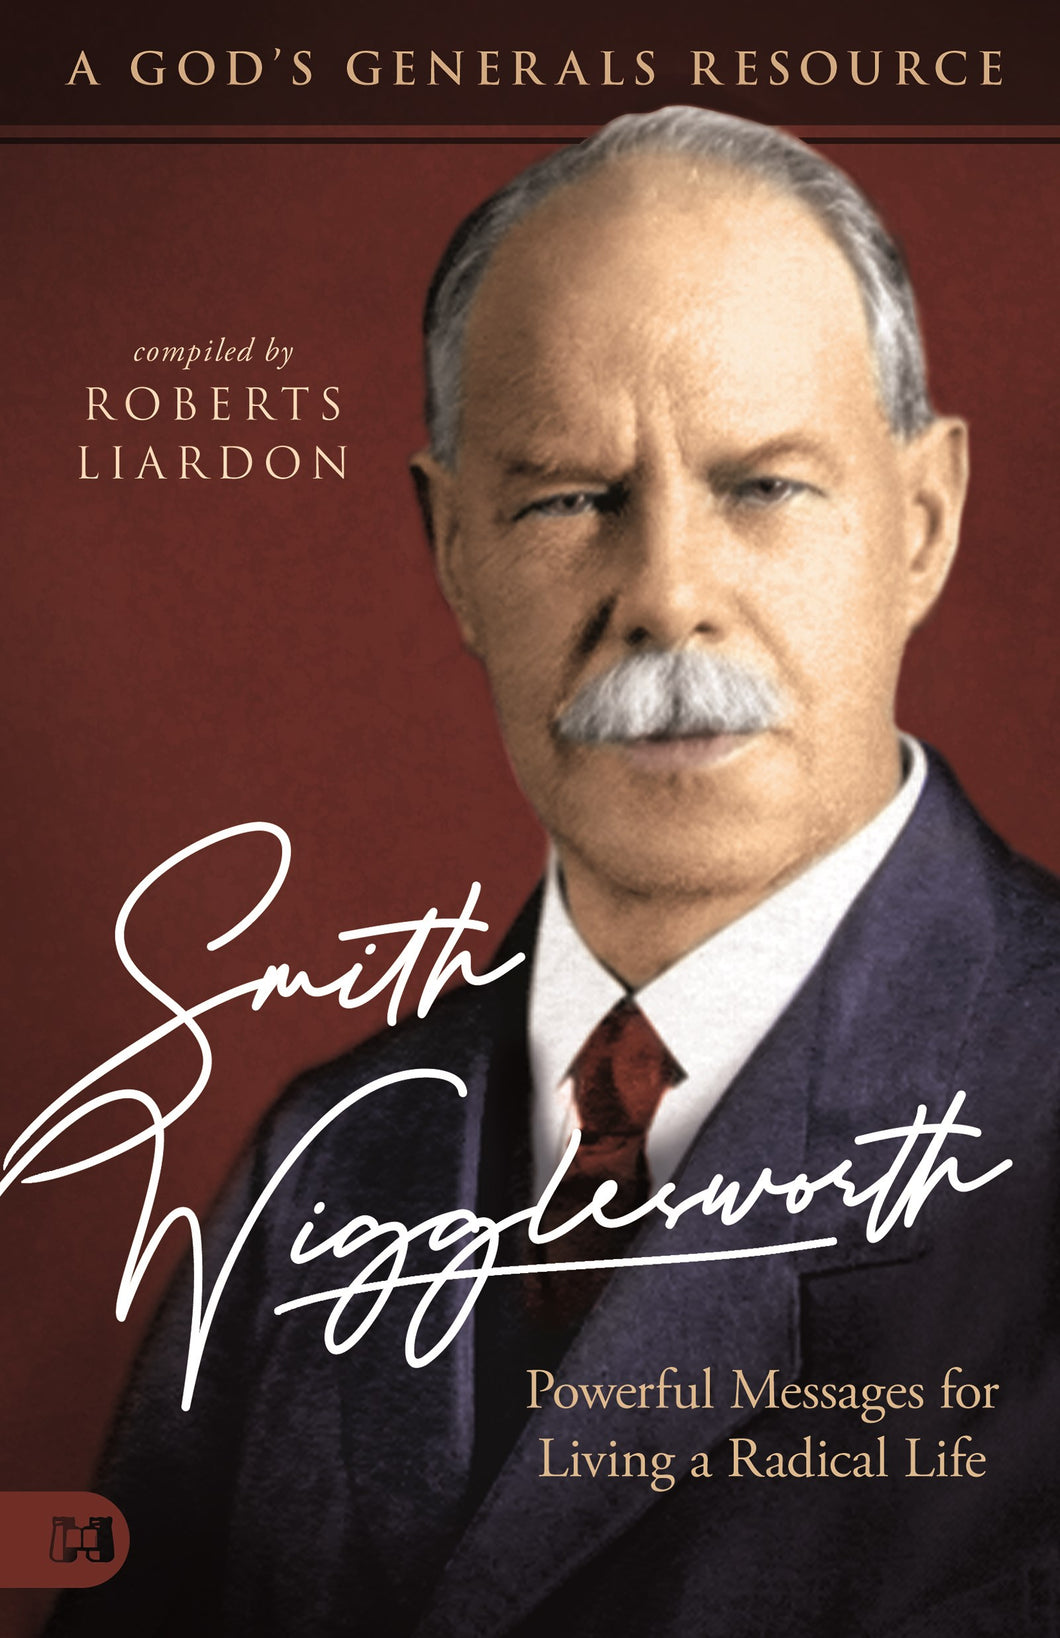 Smith Wigglesworth: Powerful Messages for Living a Radical Life (A God's Generals Resource)